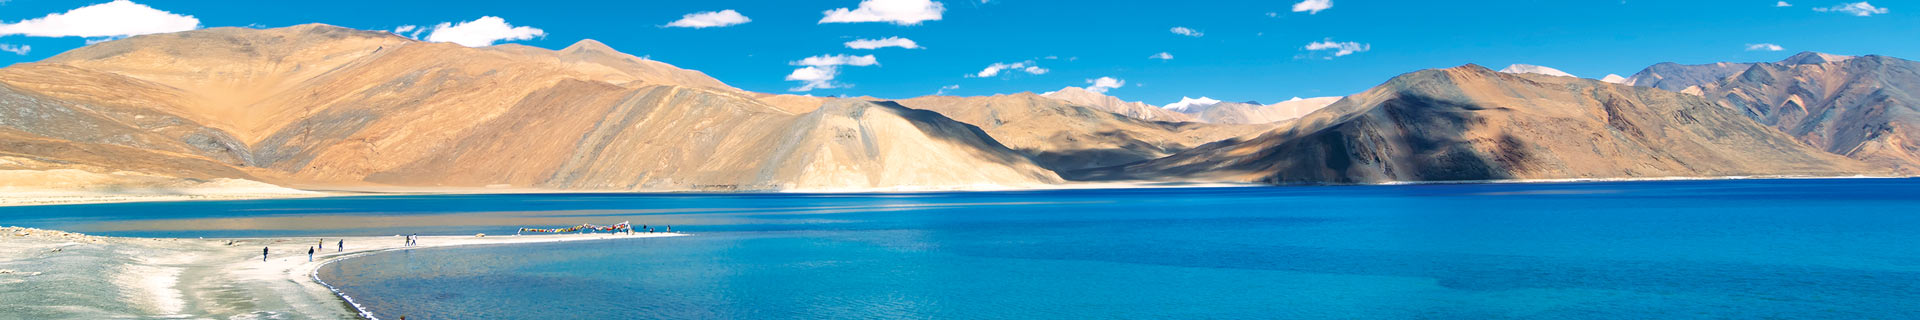 about tourism in ladakh